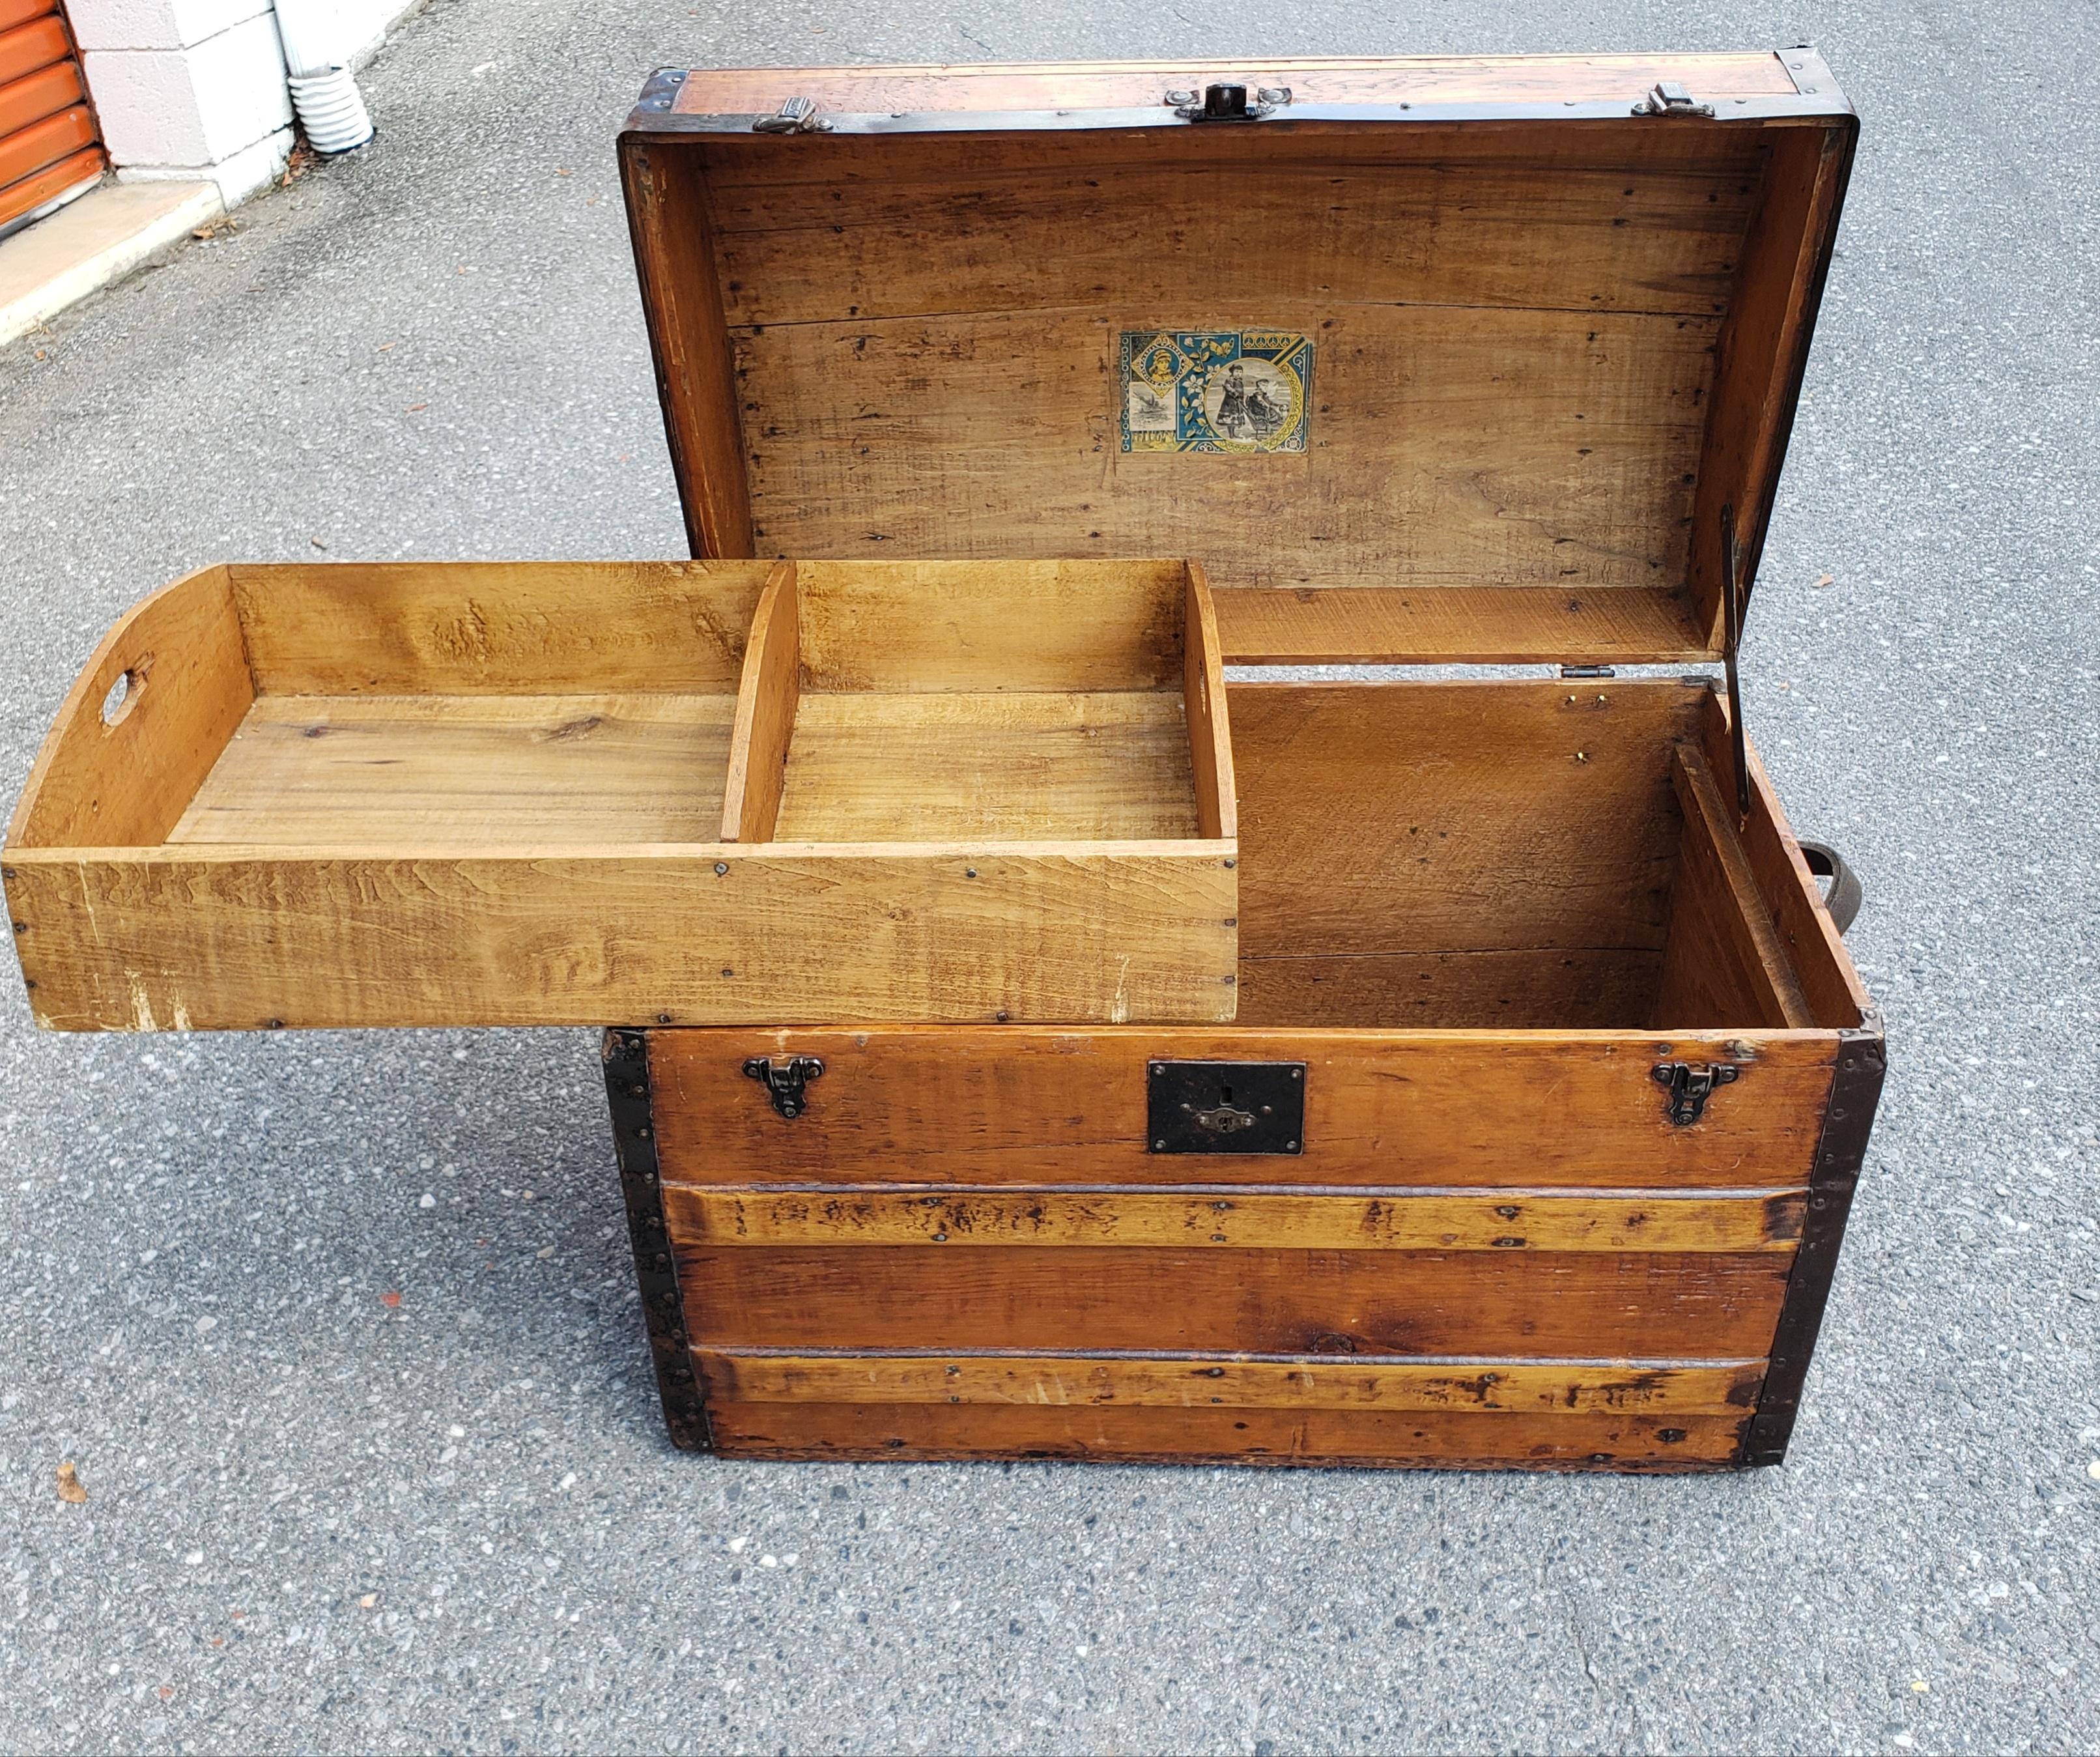 Early 20th Century Refinished American Rolling Pine Blanket Chest Storage Trunk In Good Condition For Sale In Germantown, MD